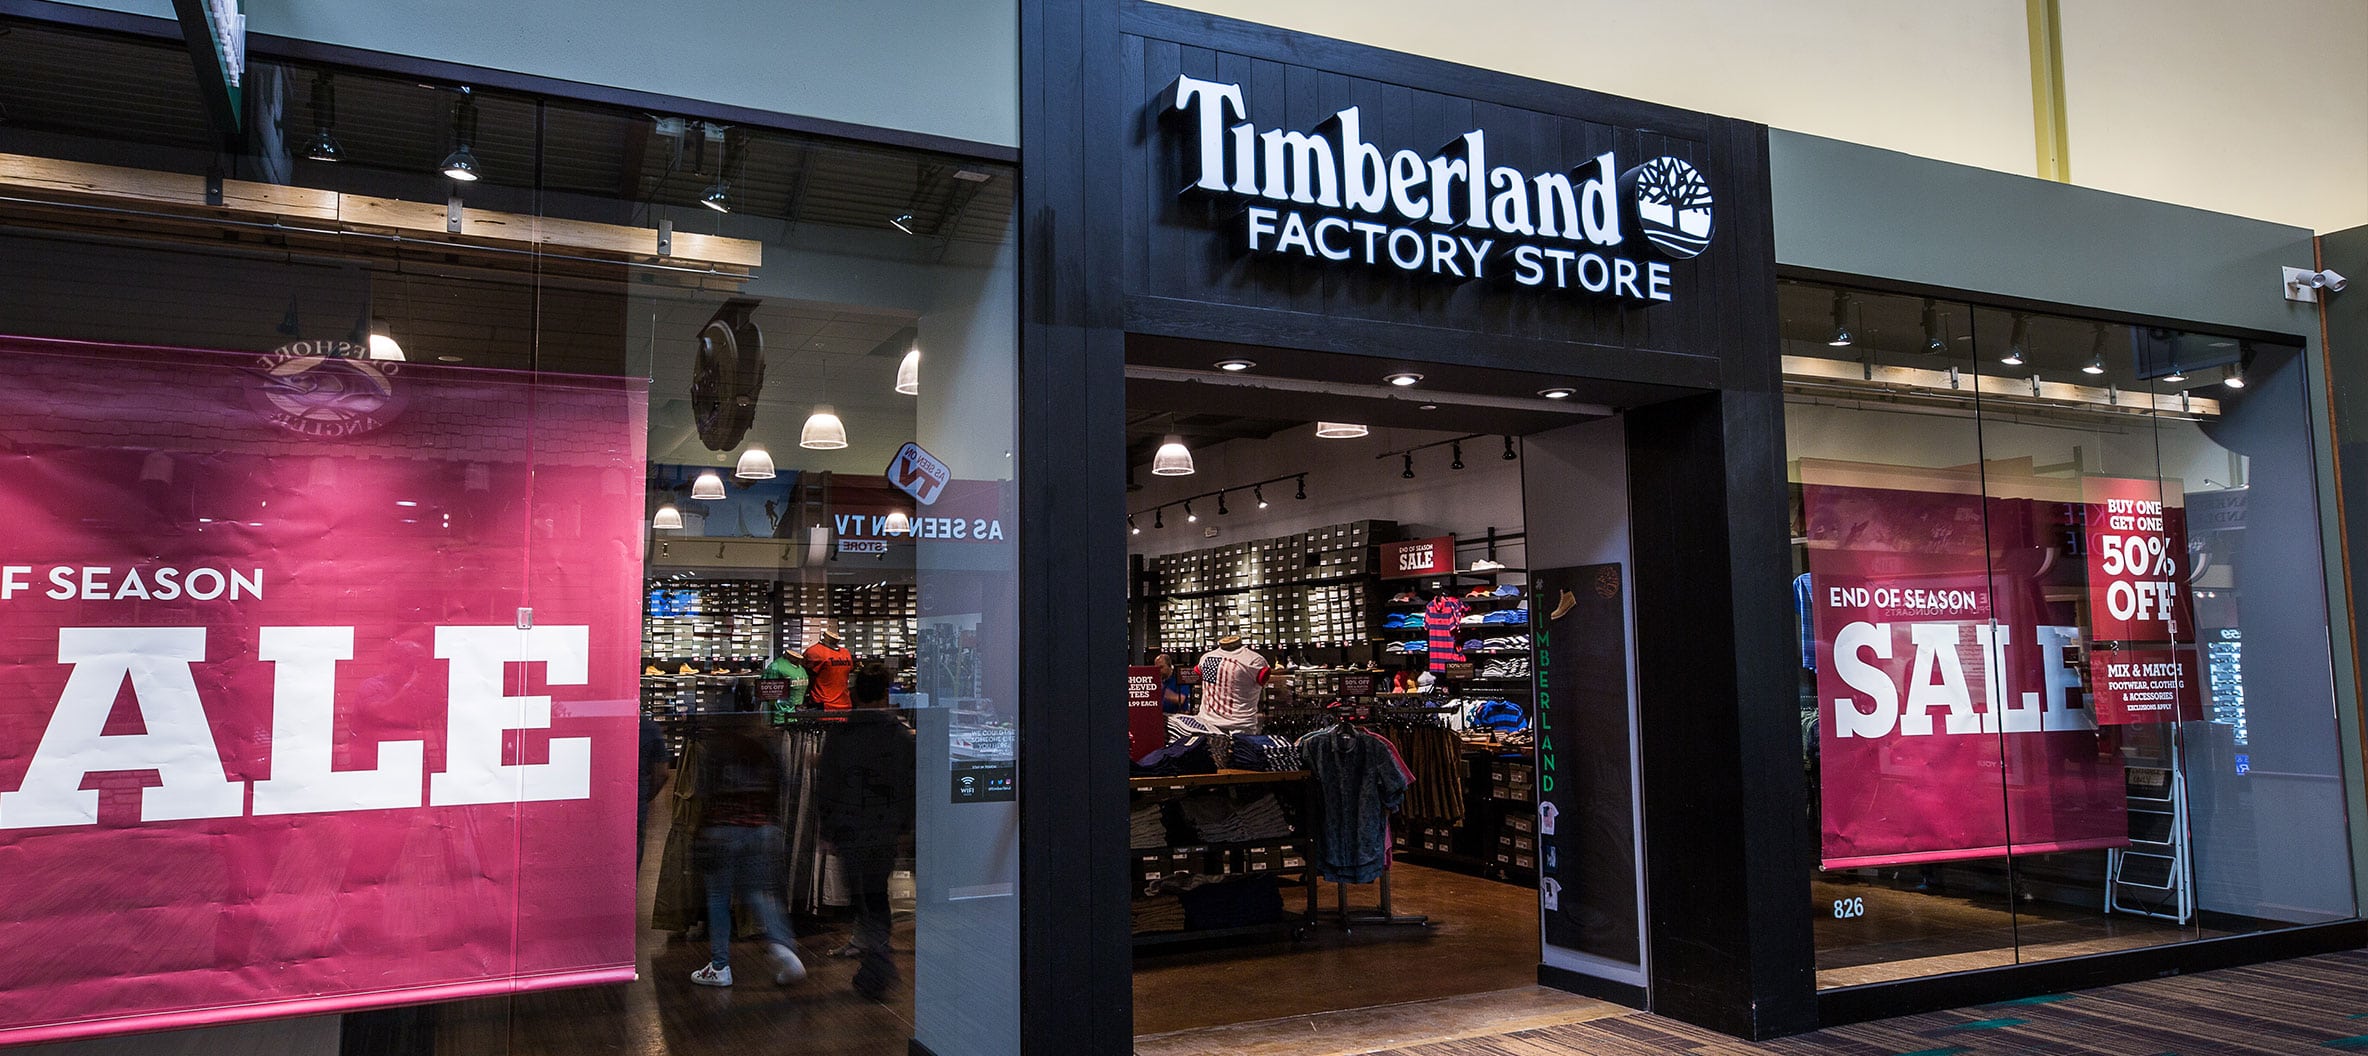 timberland store in great lakes crossing